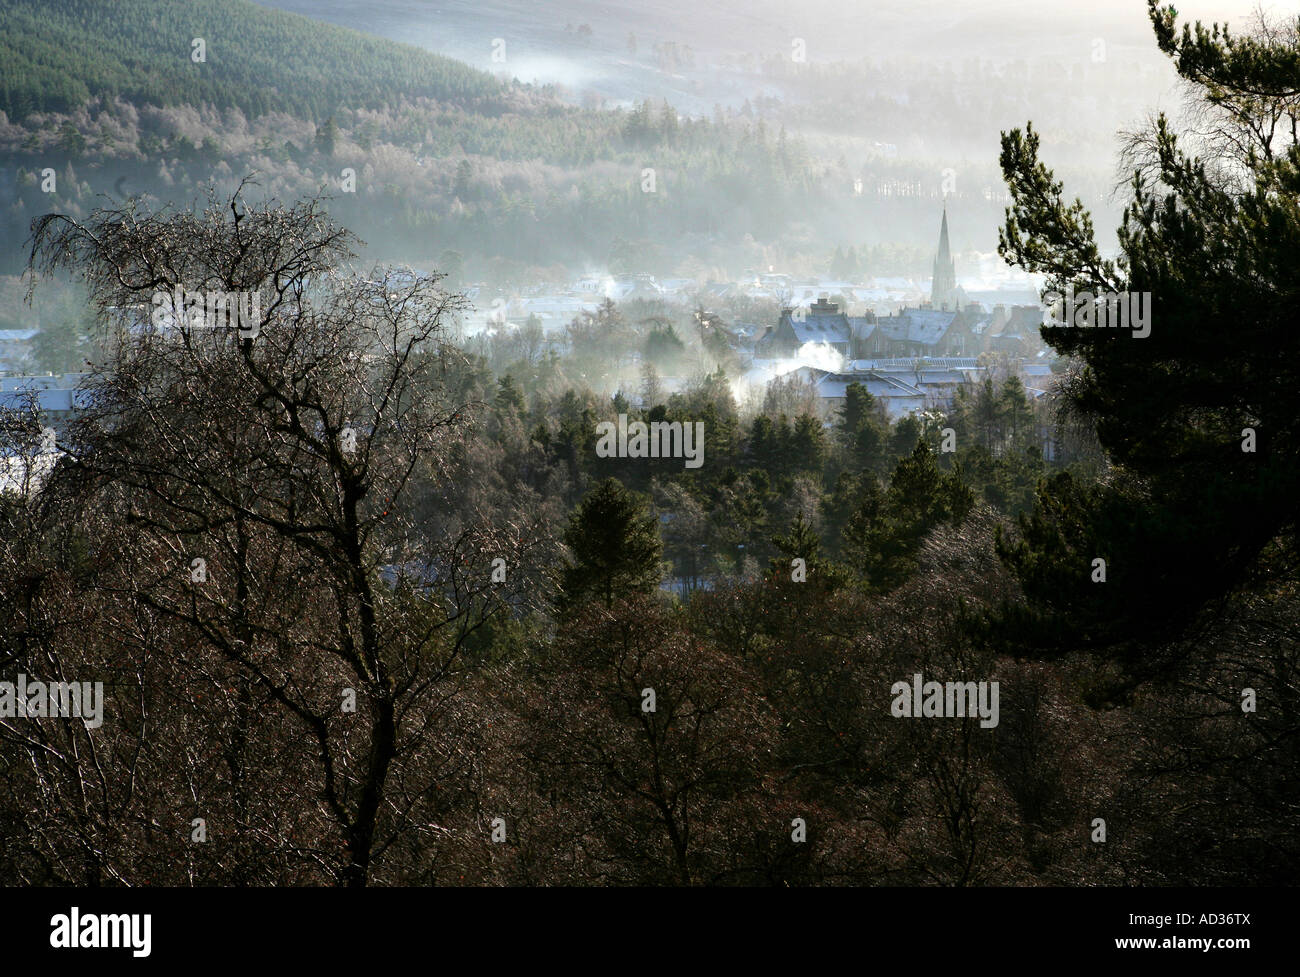 A moody landscape format image of Ballater, Scotland looking down from Craigendarroch in winter through trees. Stock Photo